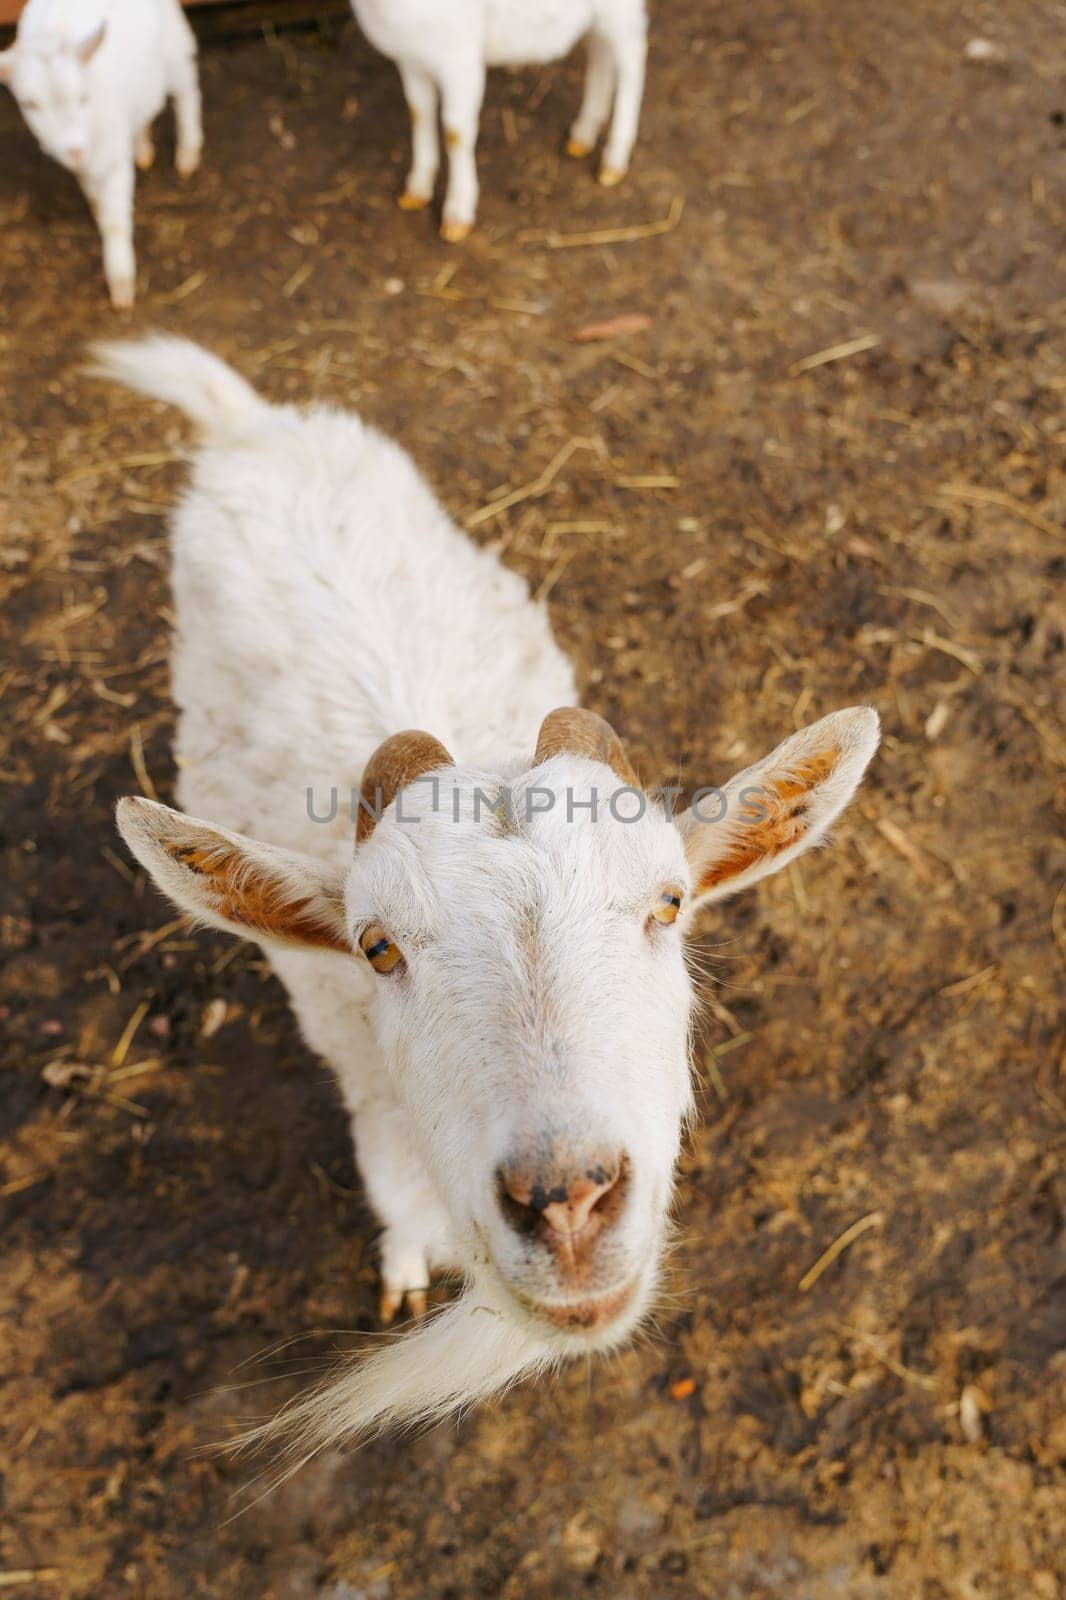 Goat on farm look peaceful and content in their enclosed environment. Vertical photo